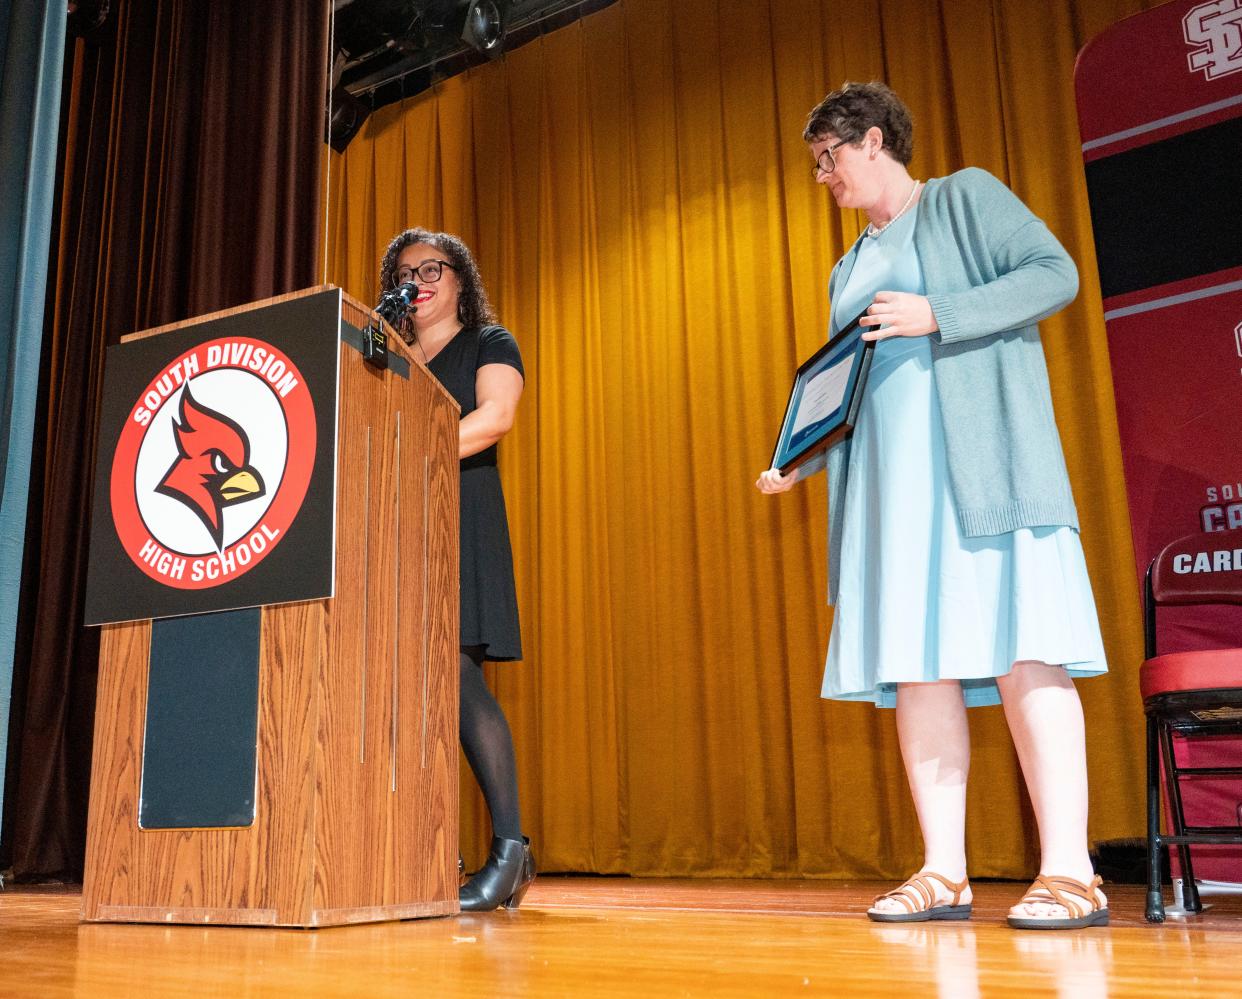 Ana Báez, left, a bilingual counselor at South Division High School, was surprised with a Wisconsin Teacher of the Year Award on May 9.  Among those at the ceremony were State Superintendent Jill Underly, right.